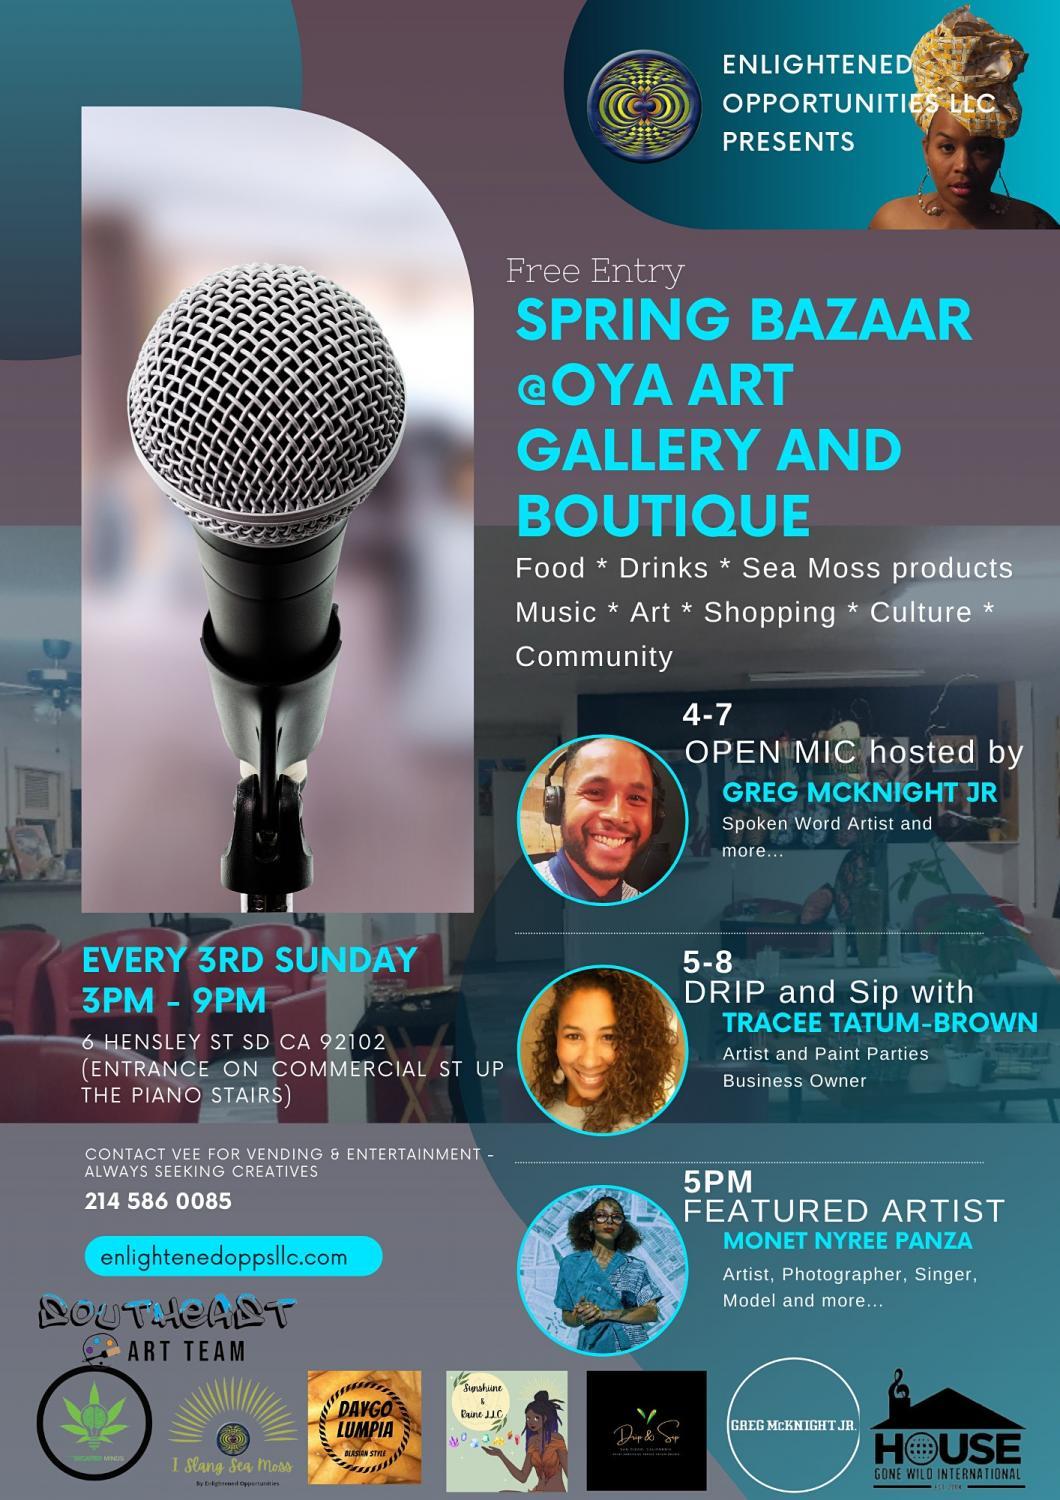 Spring Bazaar at Oya Art Gallery and Boutique